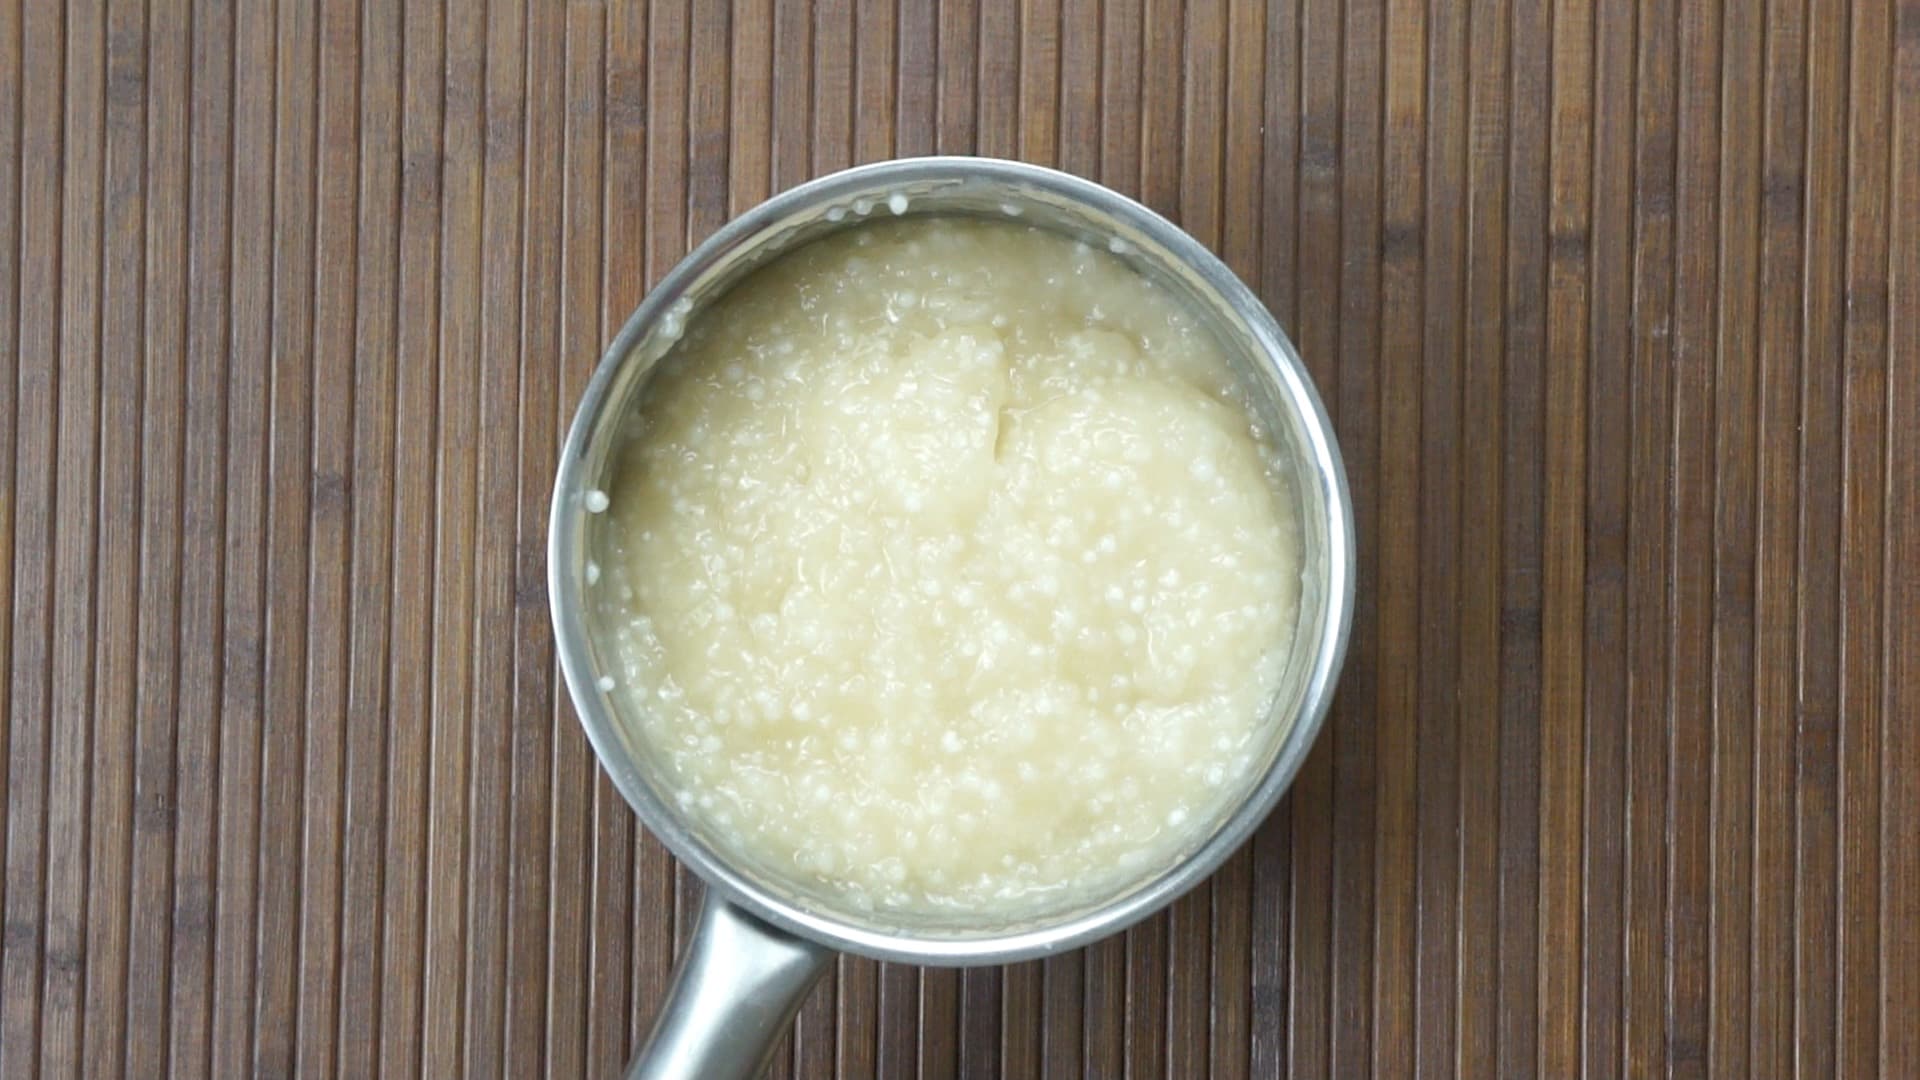 A saucepan on an induction hot plate with a thick light brownish - whitish liquid (milk) and small pearls.